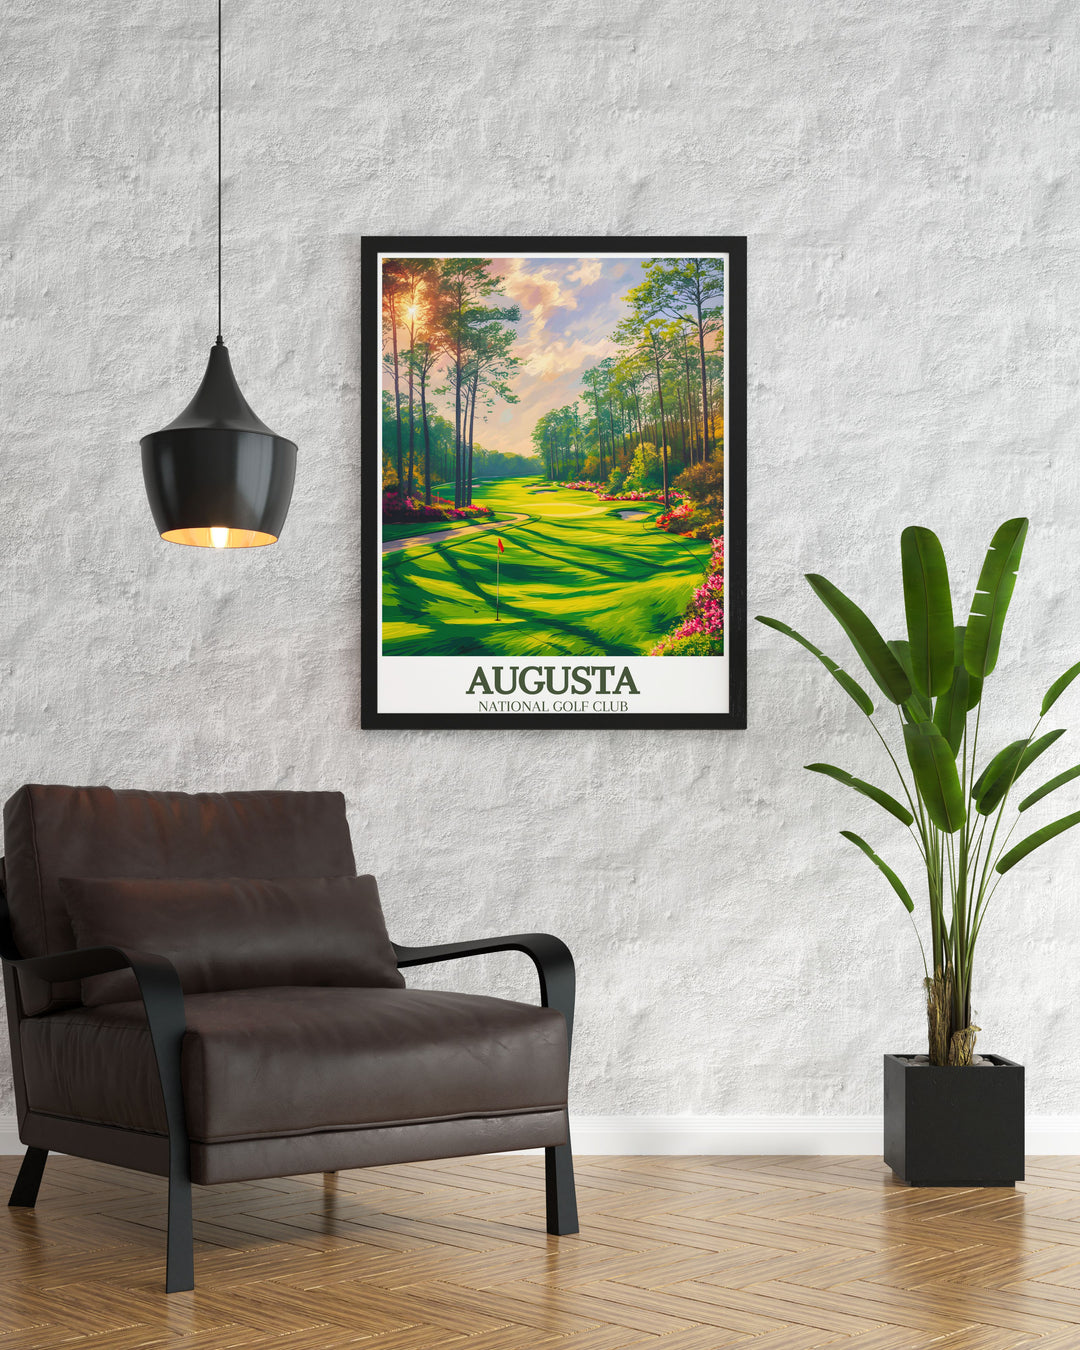 Beautiful Augusta art highlighting Magnolia Lane Amen Corner an excellent choice for golfer gifts and birthday presents celebrating the elegance and tradition of Augusta National